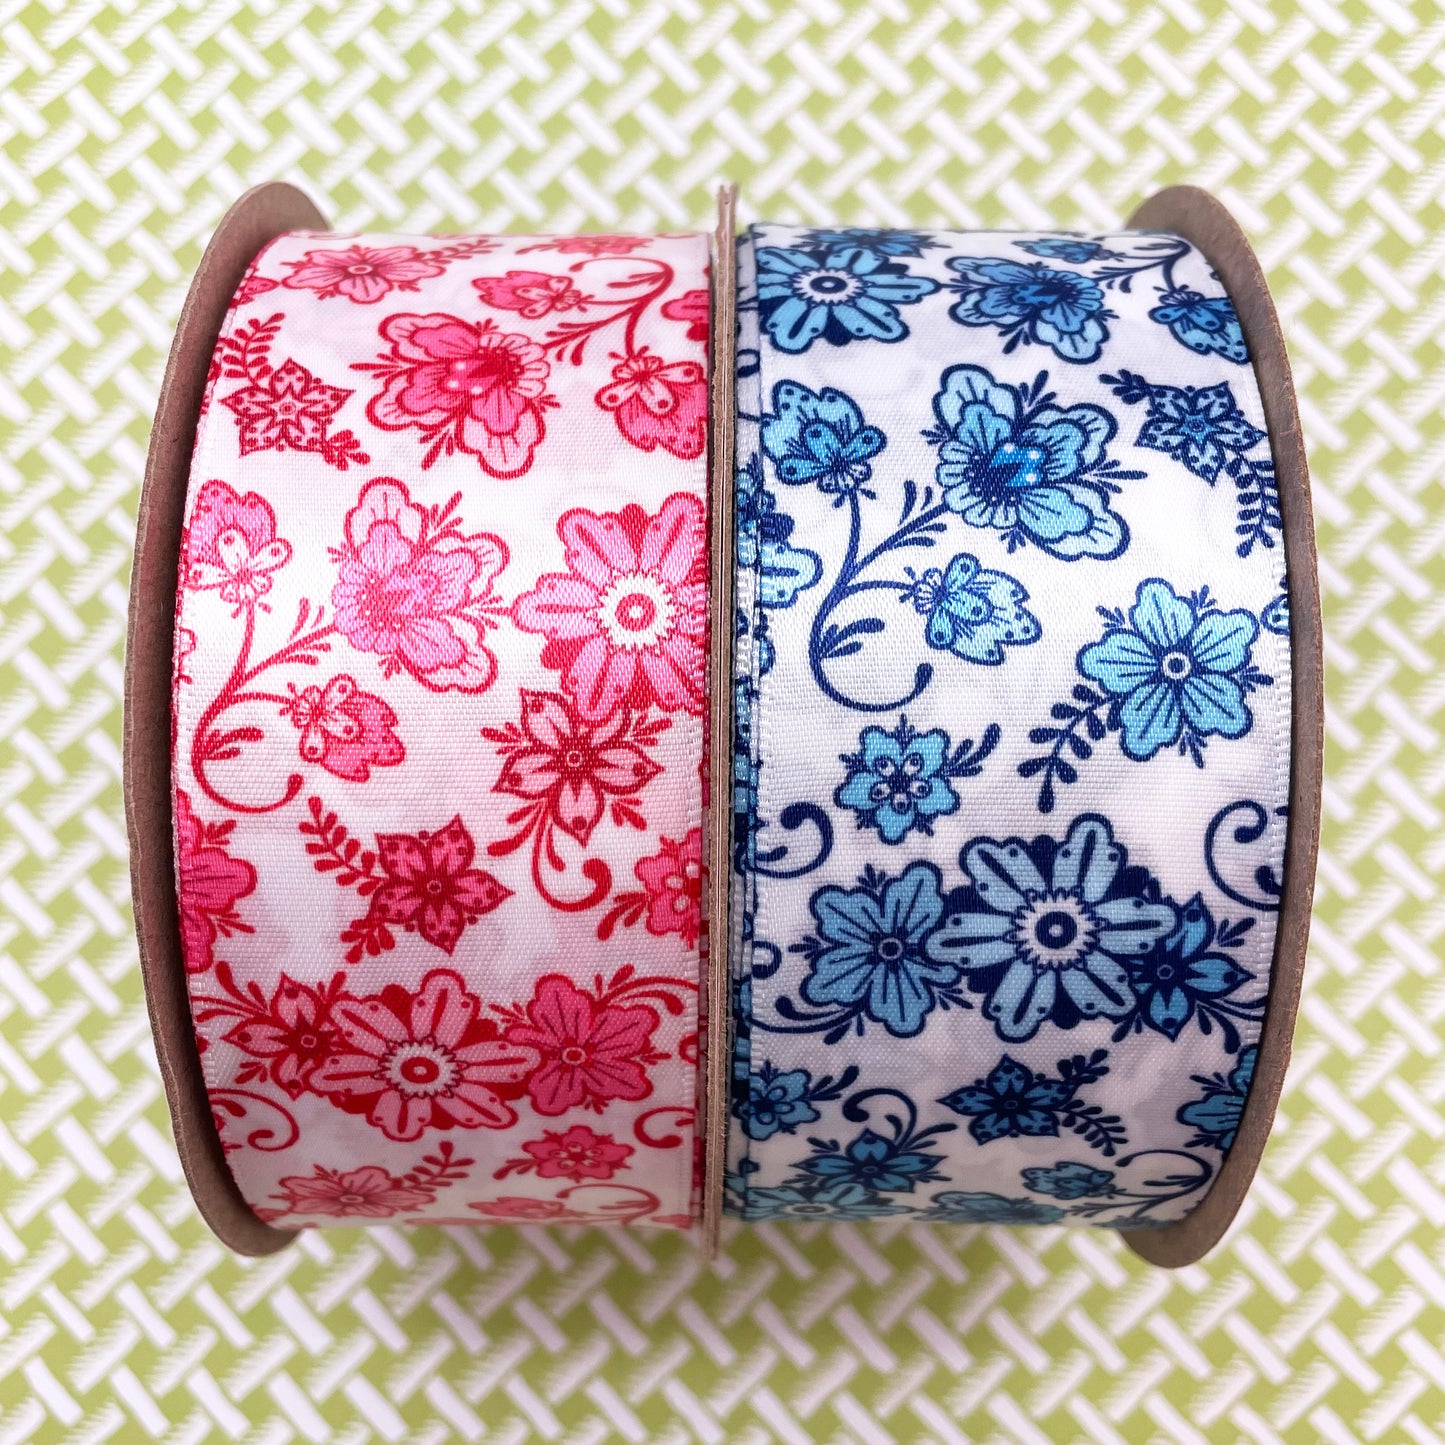 Chinoiserie Ginger jar floral design ribbon  red and white printed on 1.5" white single face satin